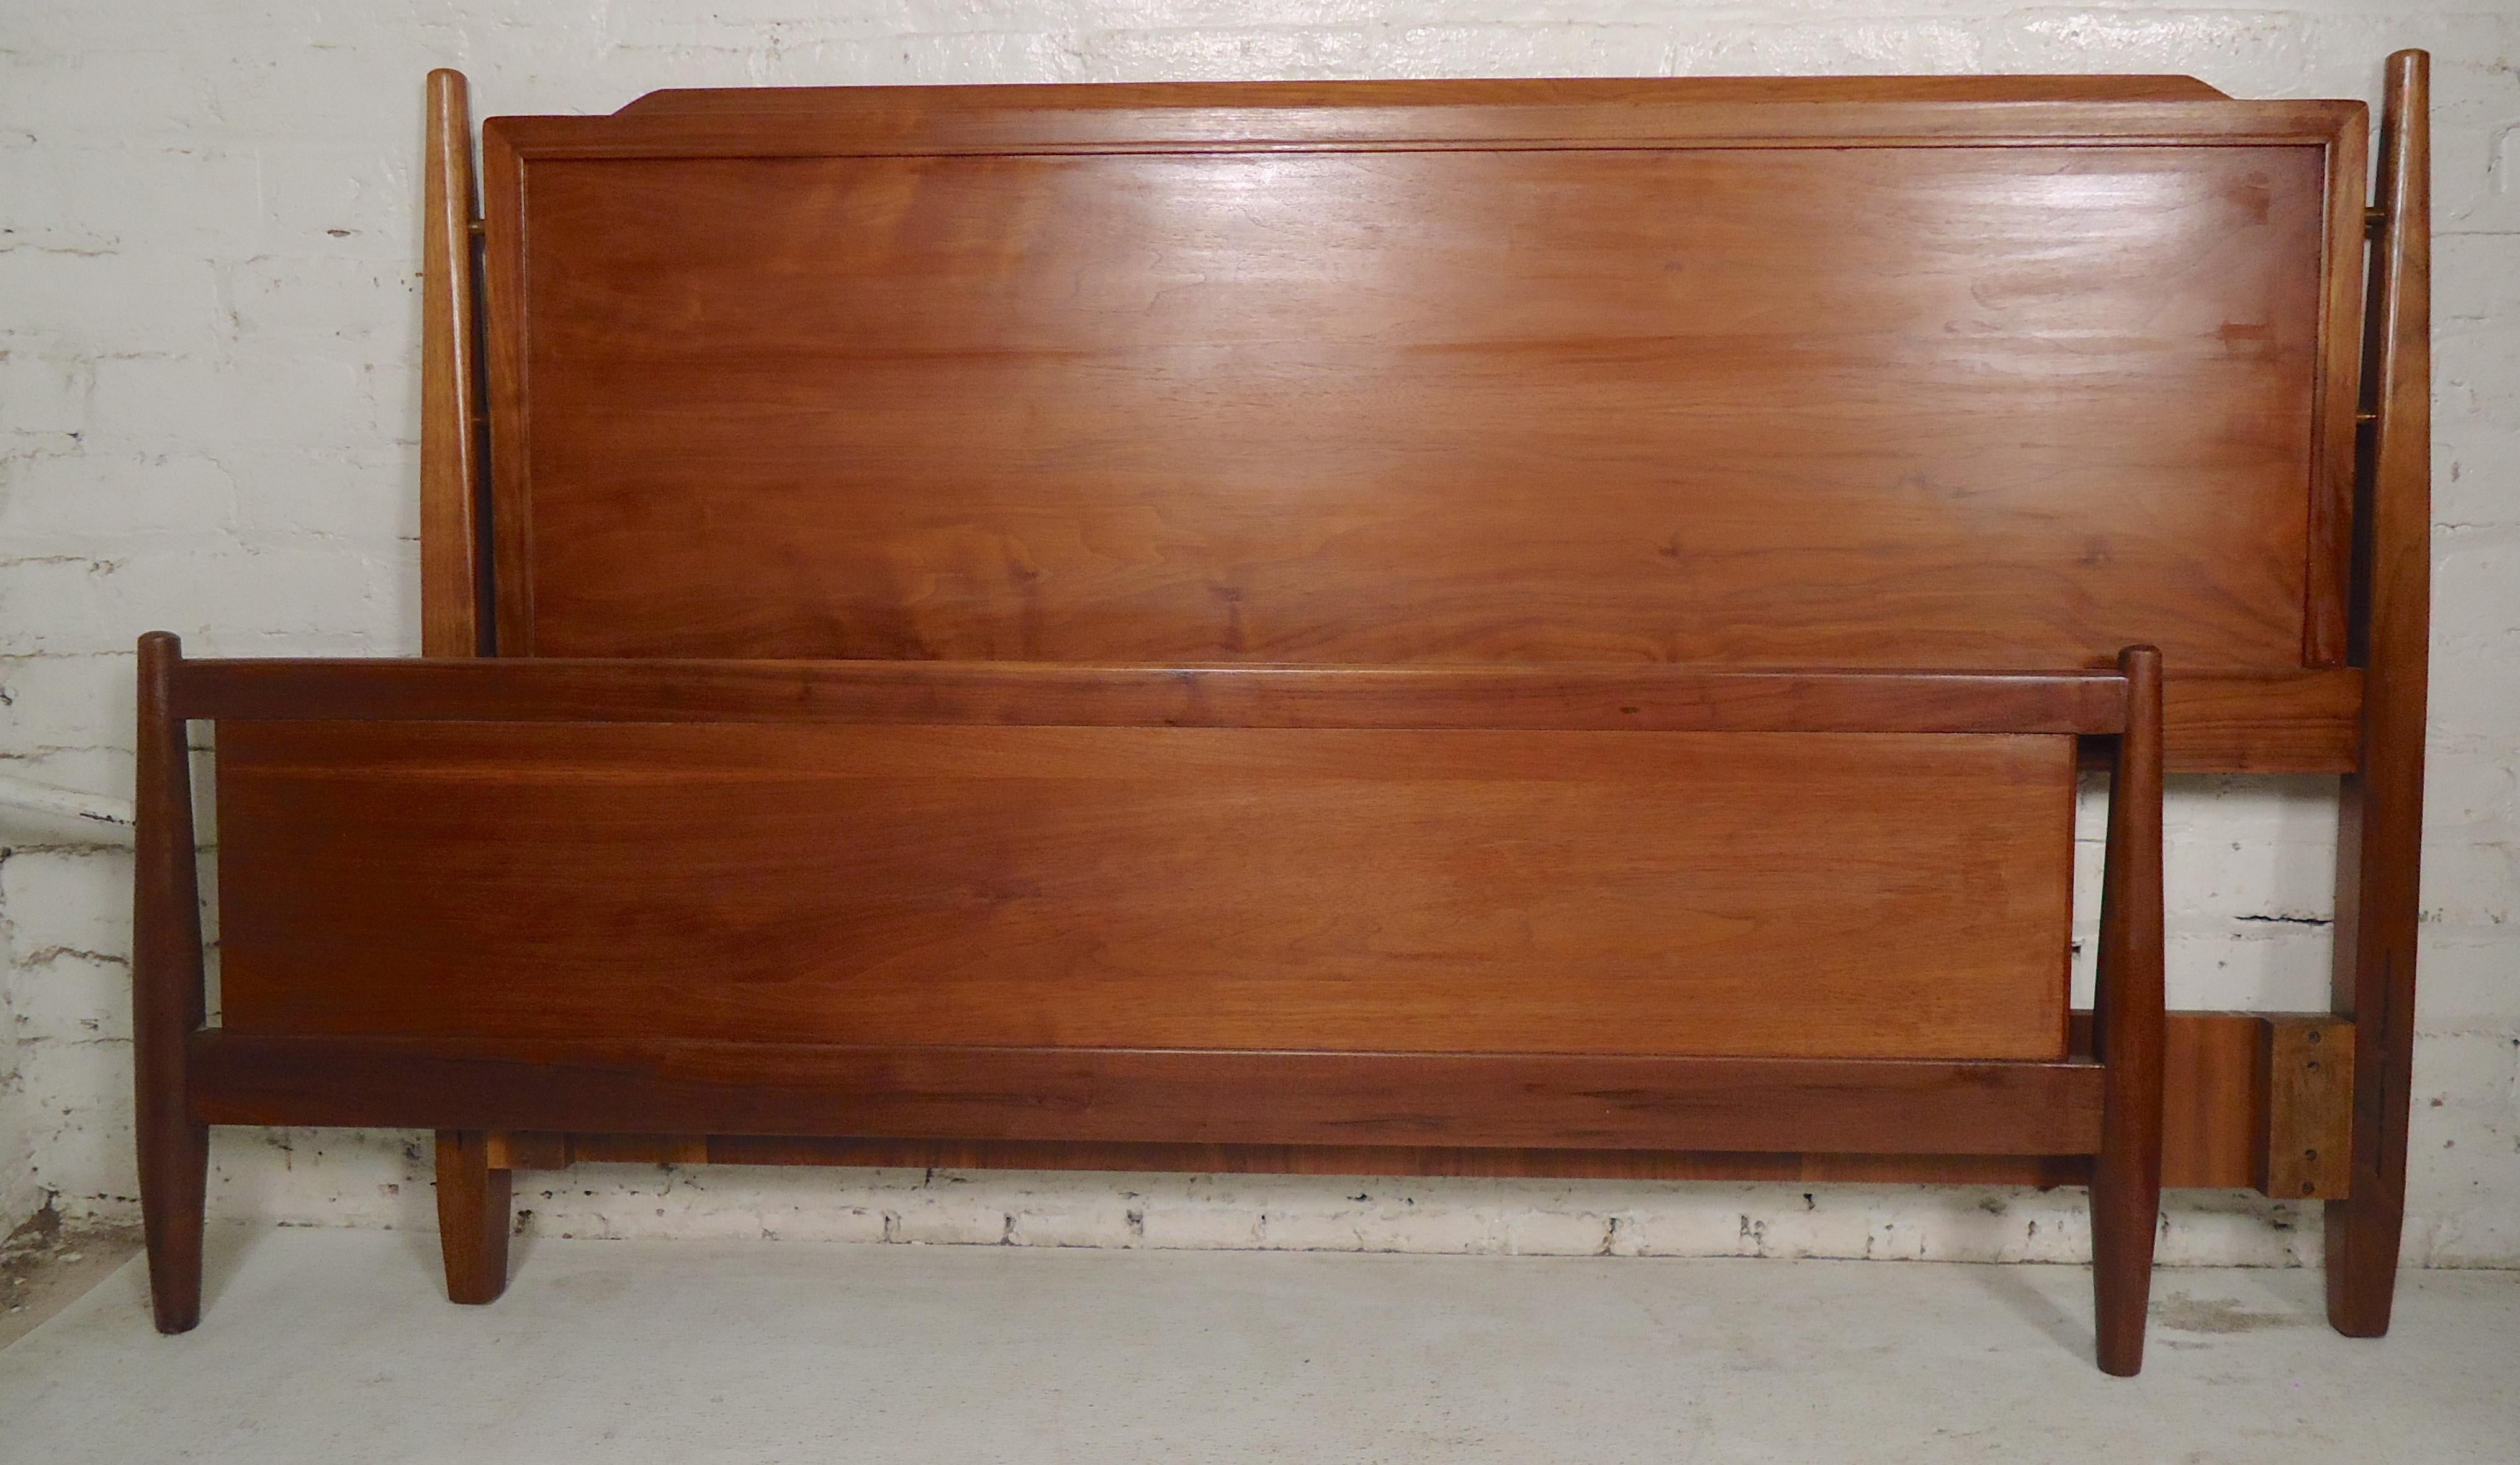 Vintage modern style headboard and footboard in walnut grain.
(Please confirm item location - NY or NJ - with dealer).
 